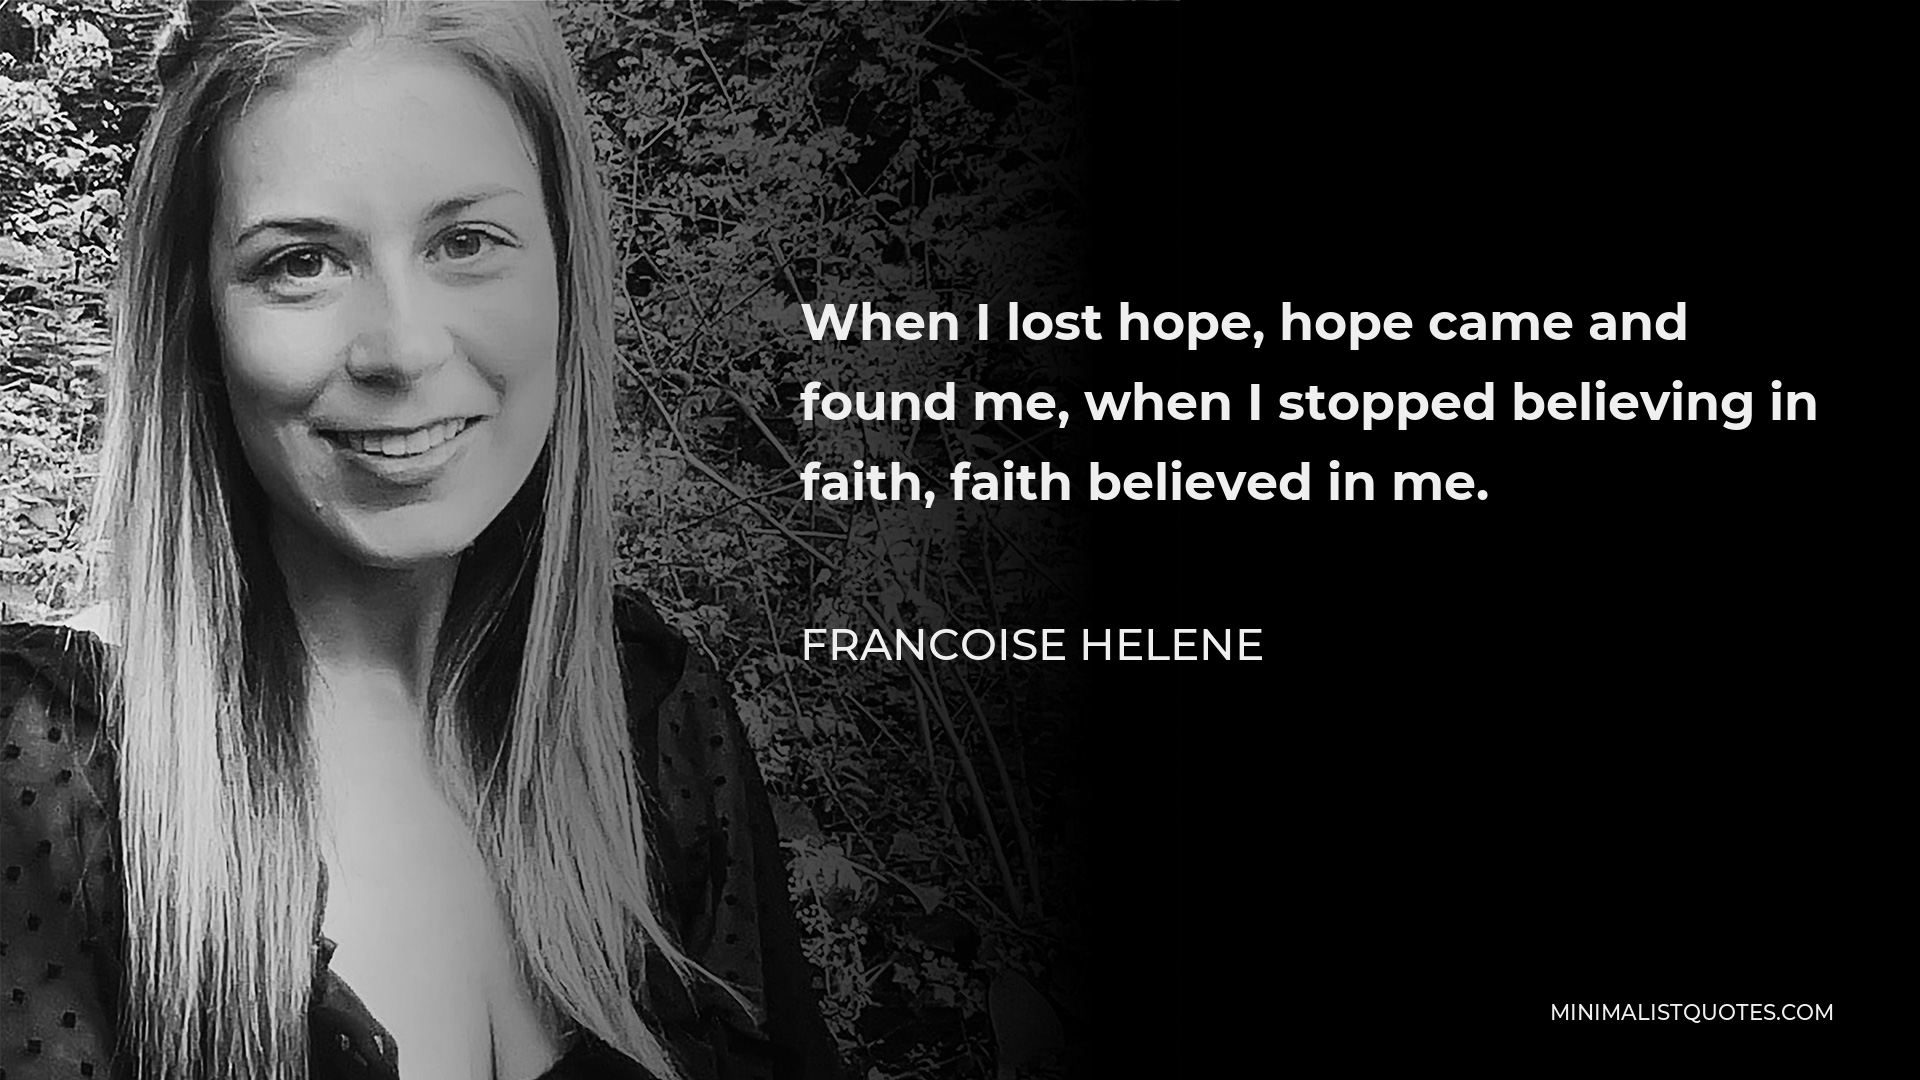 Francoise Helene Quote - When I lost hope, hope came and found me, when I stopped believing in faith, faith believed in me.